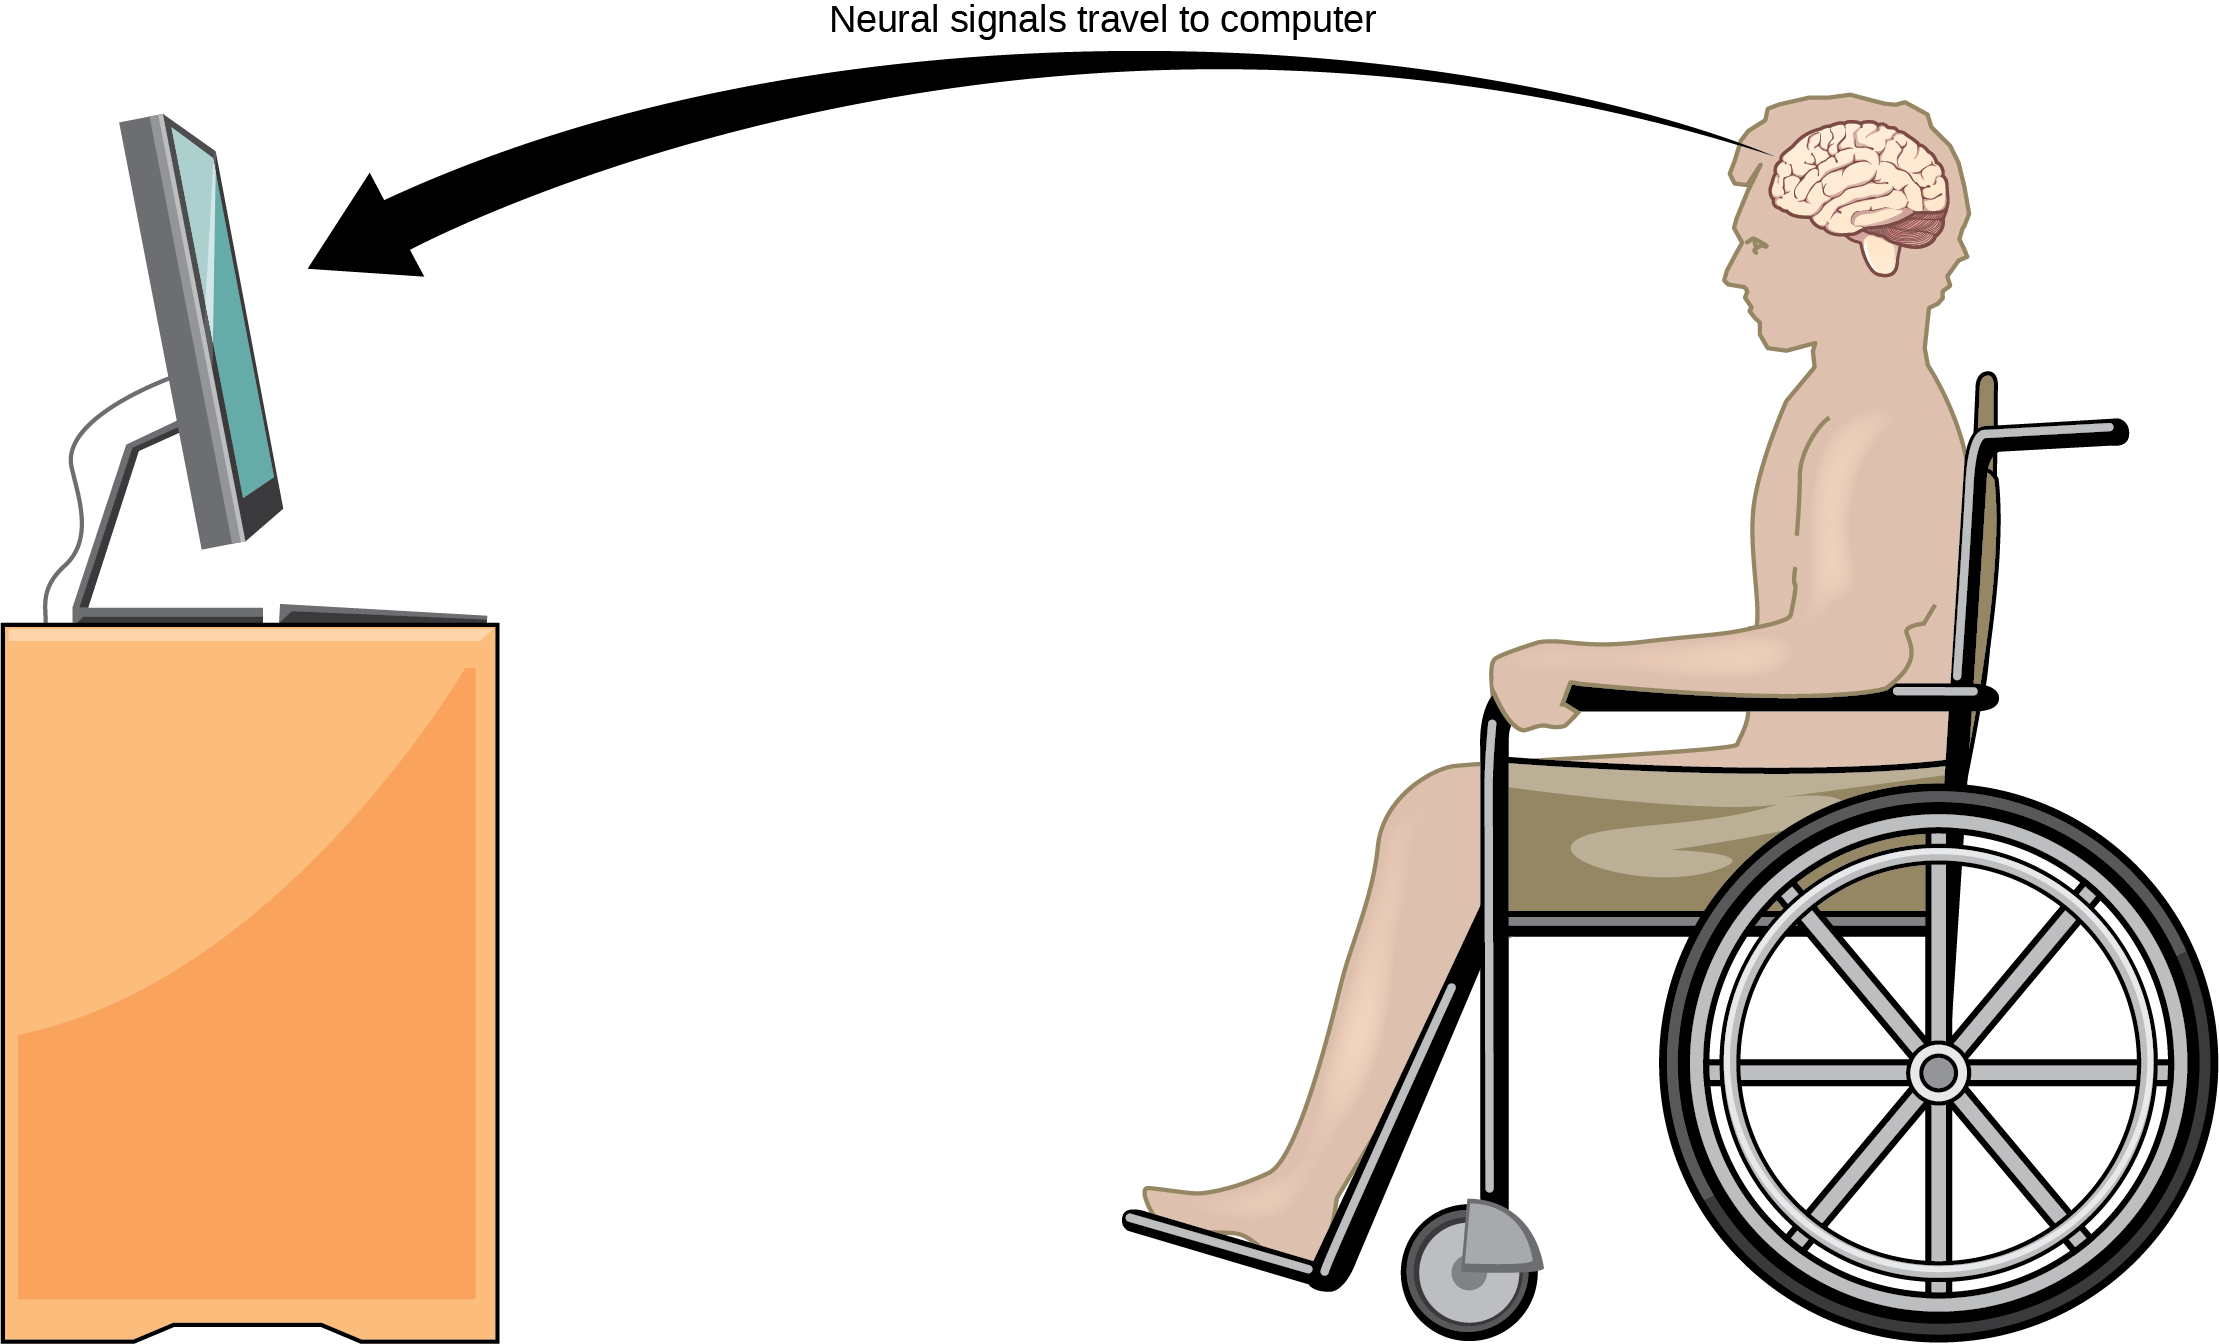 Illustration shows a person in a wheelchair, facing a computer screen. An arrow indicates that neural signals travel from the brain of the paralyzed person to the computer.